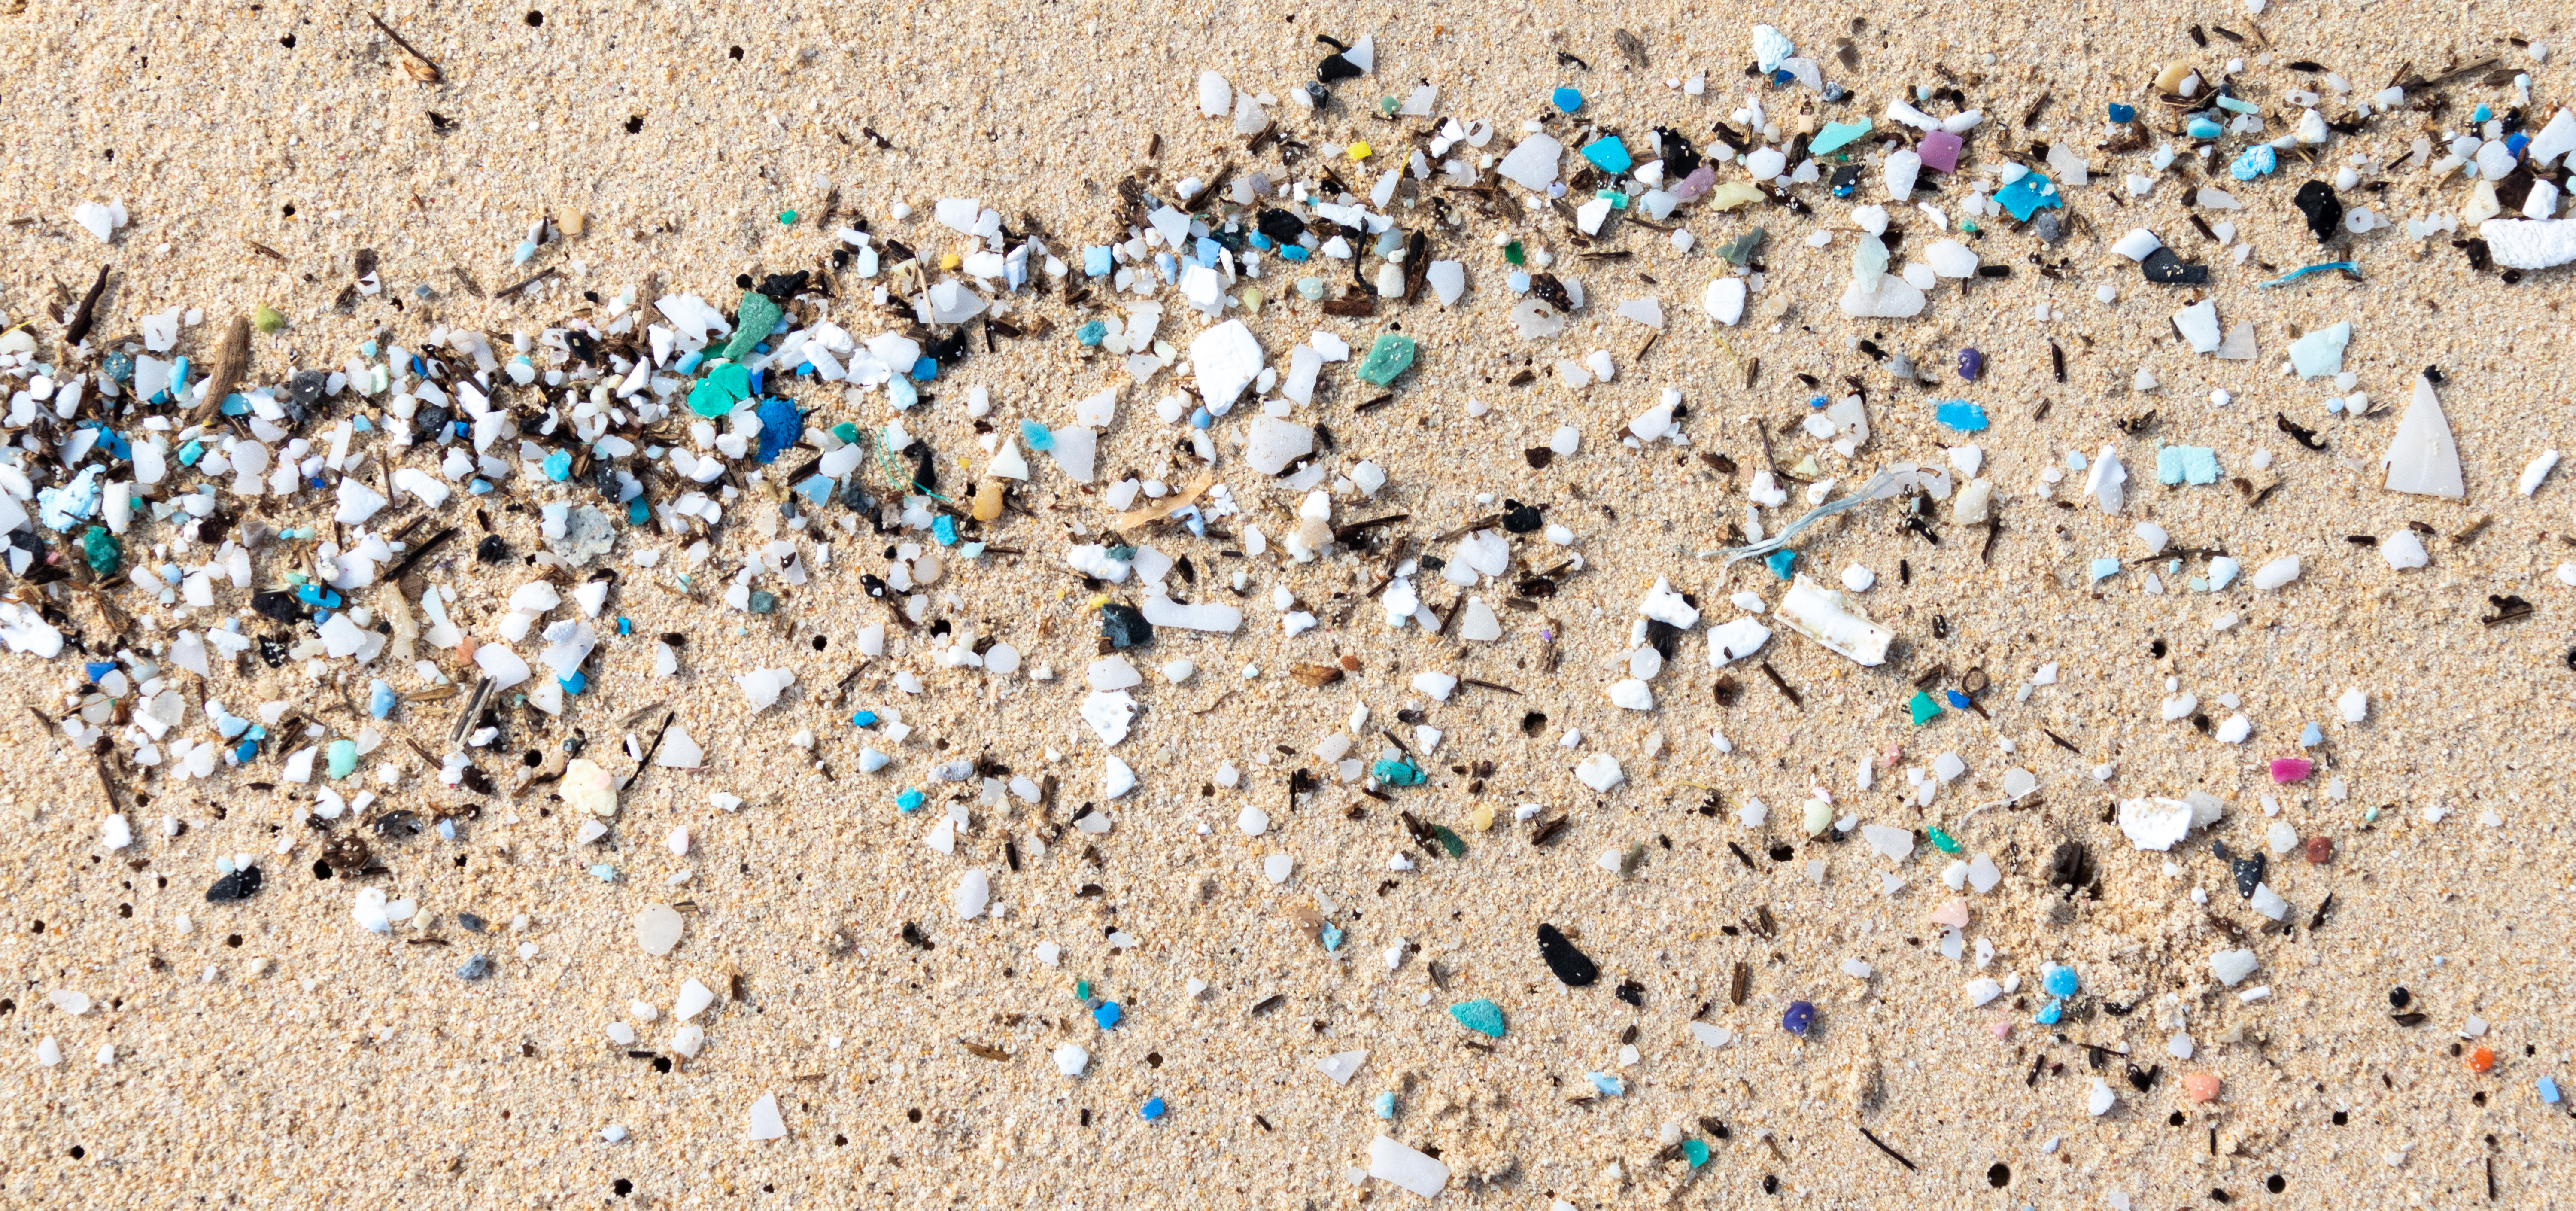 Image - Roehampton academics awarded Leverhulme Research Project Grant to study microplastics in groundwater ecosystems